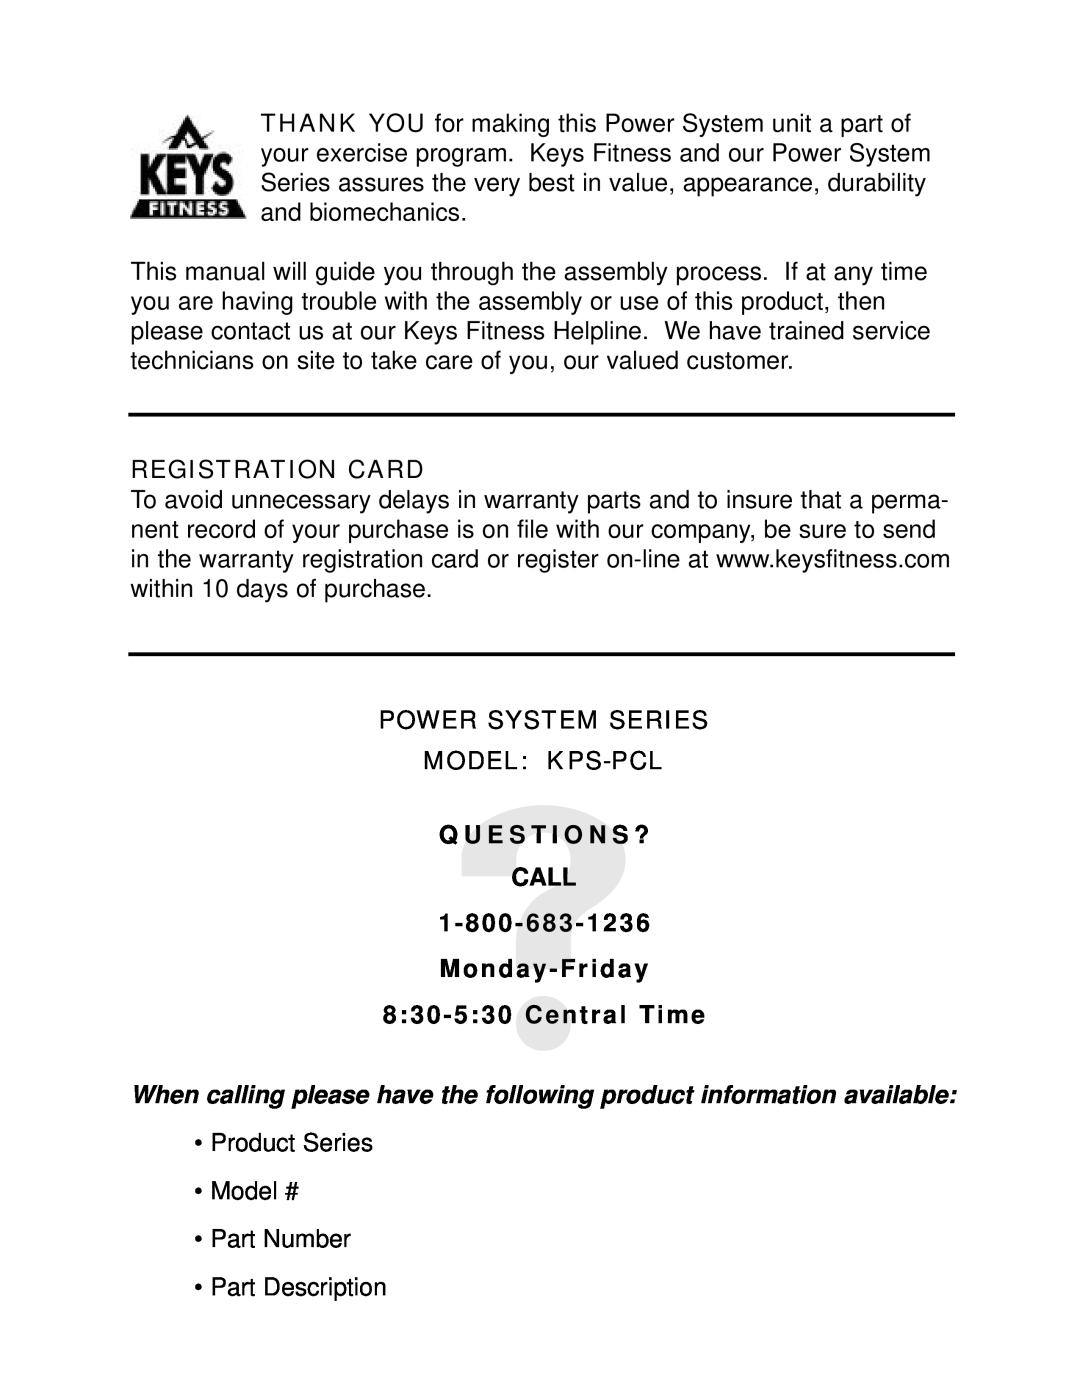 Keys Fitness KPS-PCL manual Registration Card, Power System Series Model Kps-Pcl Q U E S T I O N S ? Call, Central Time 